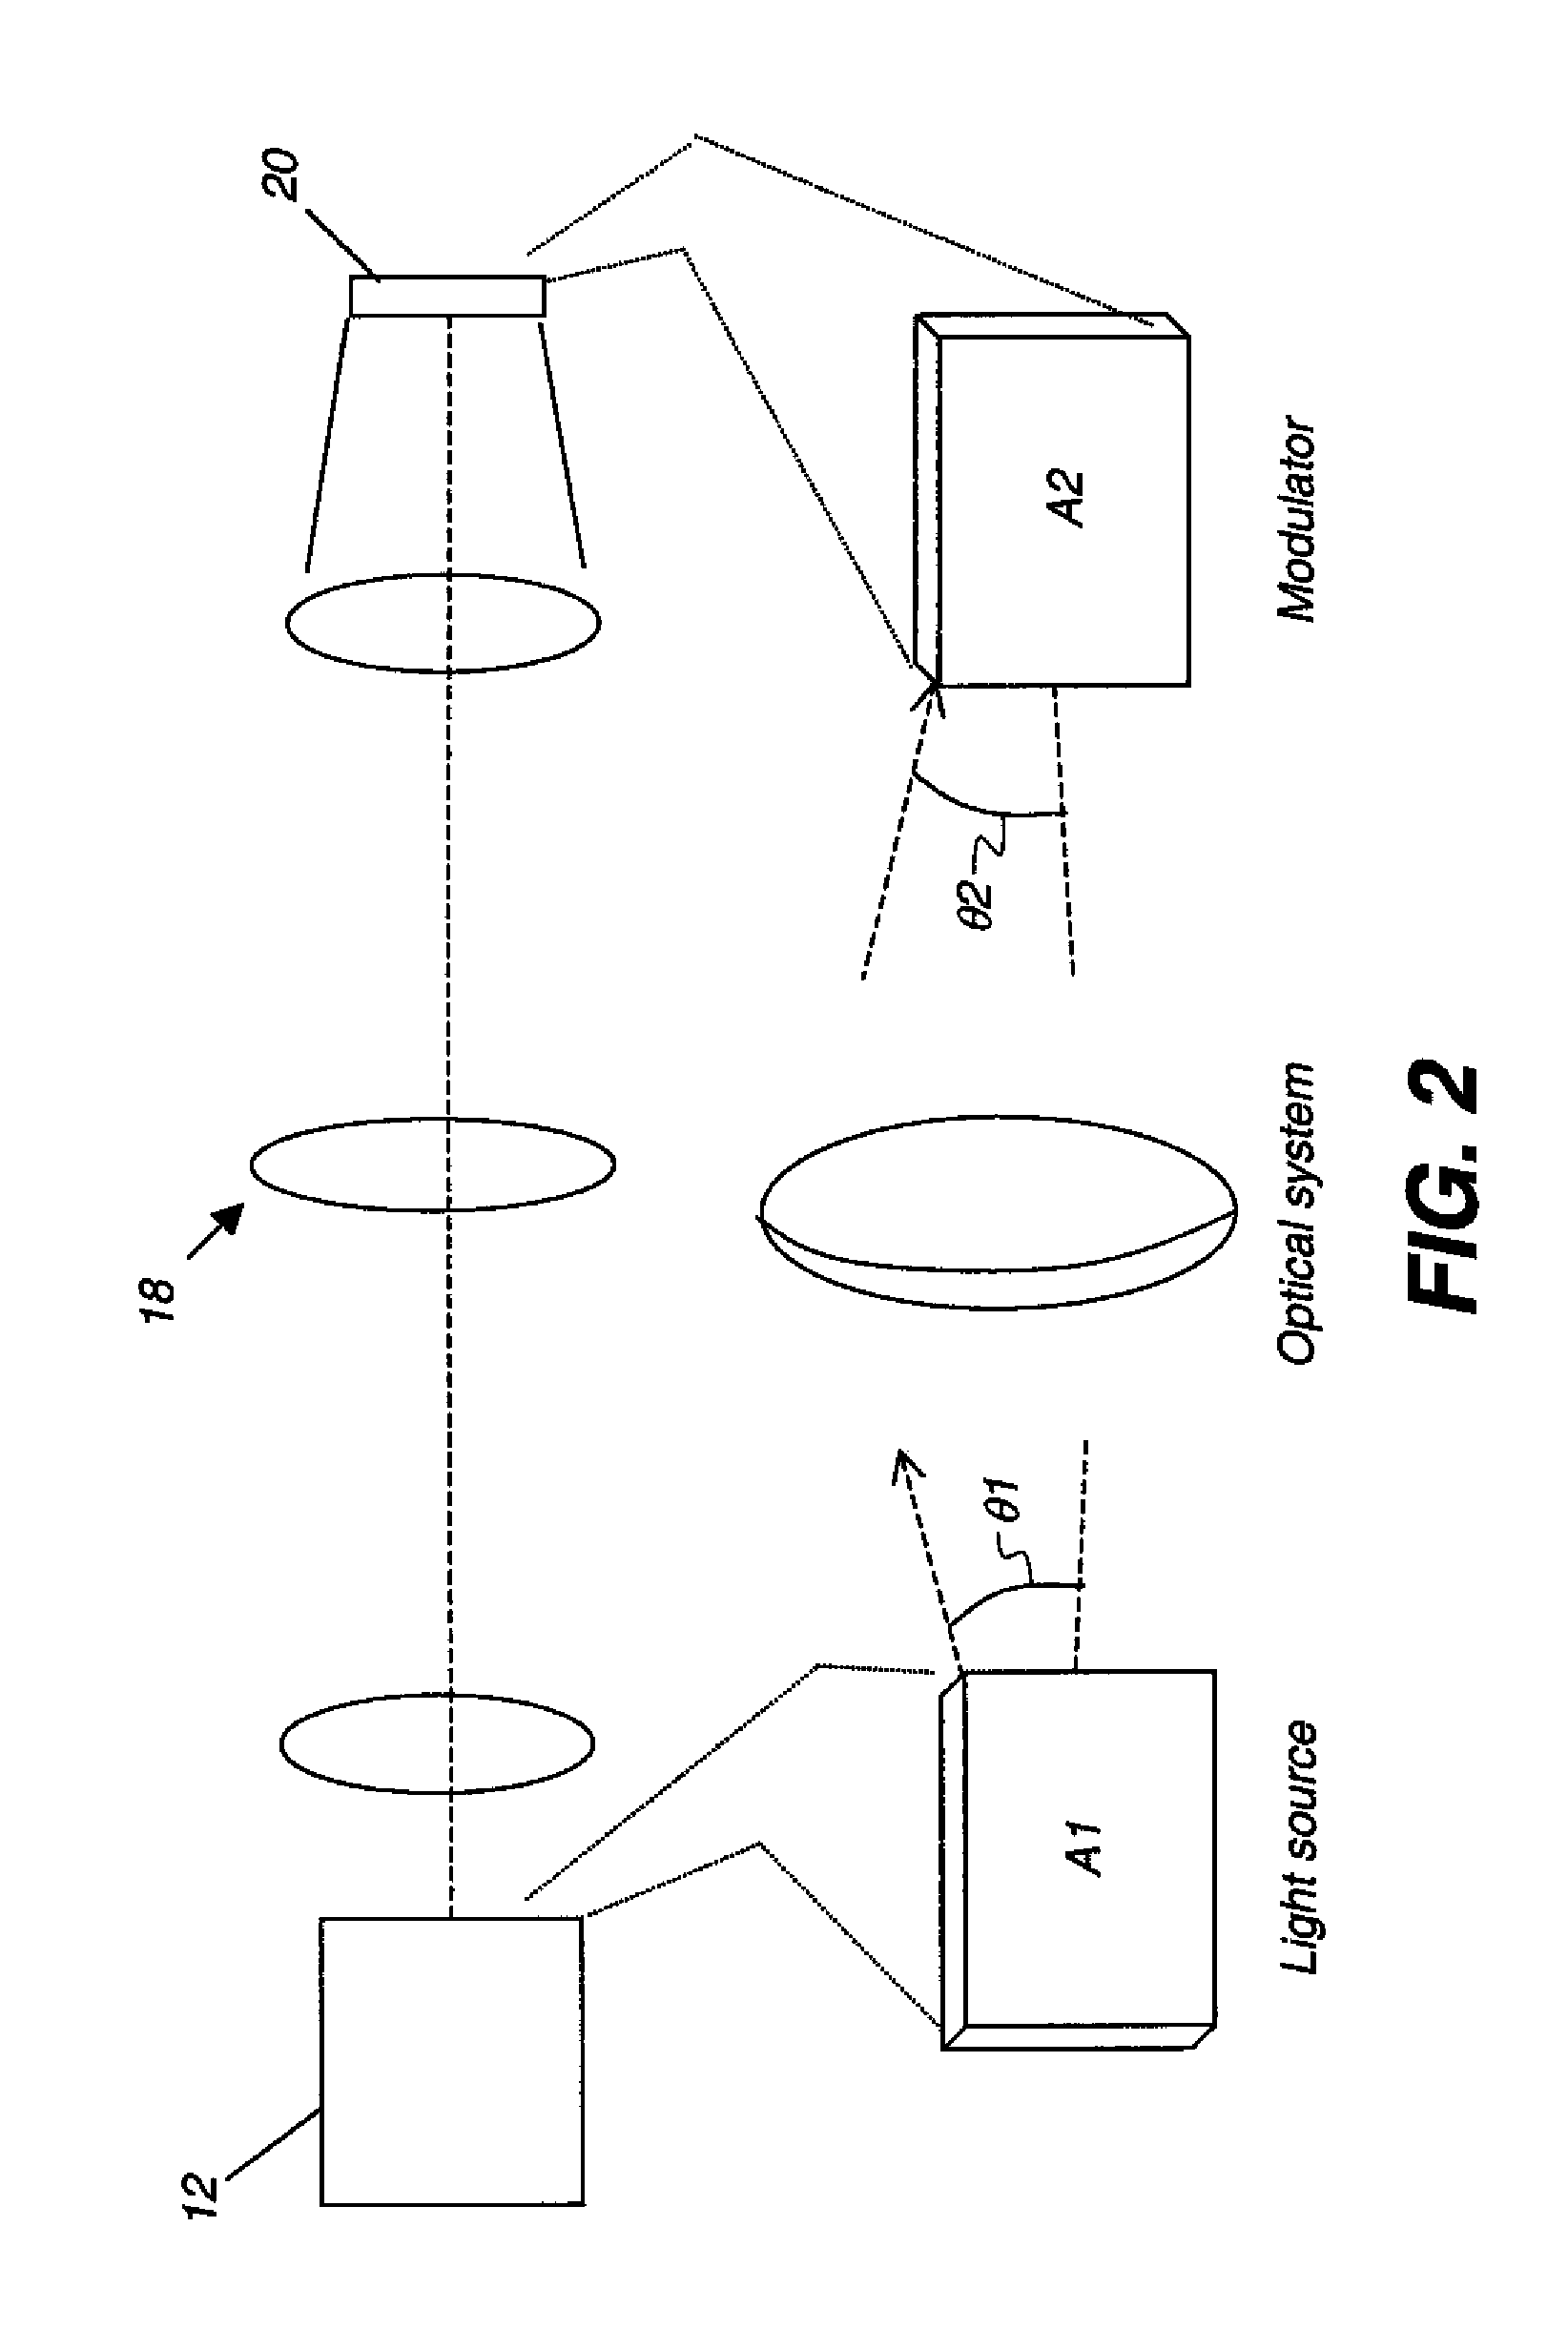 Stereo projection using polarized solid state light sources